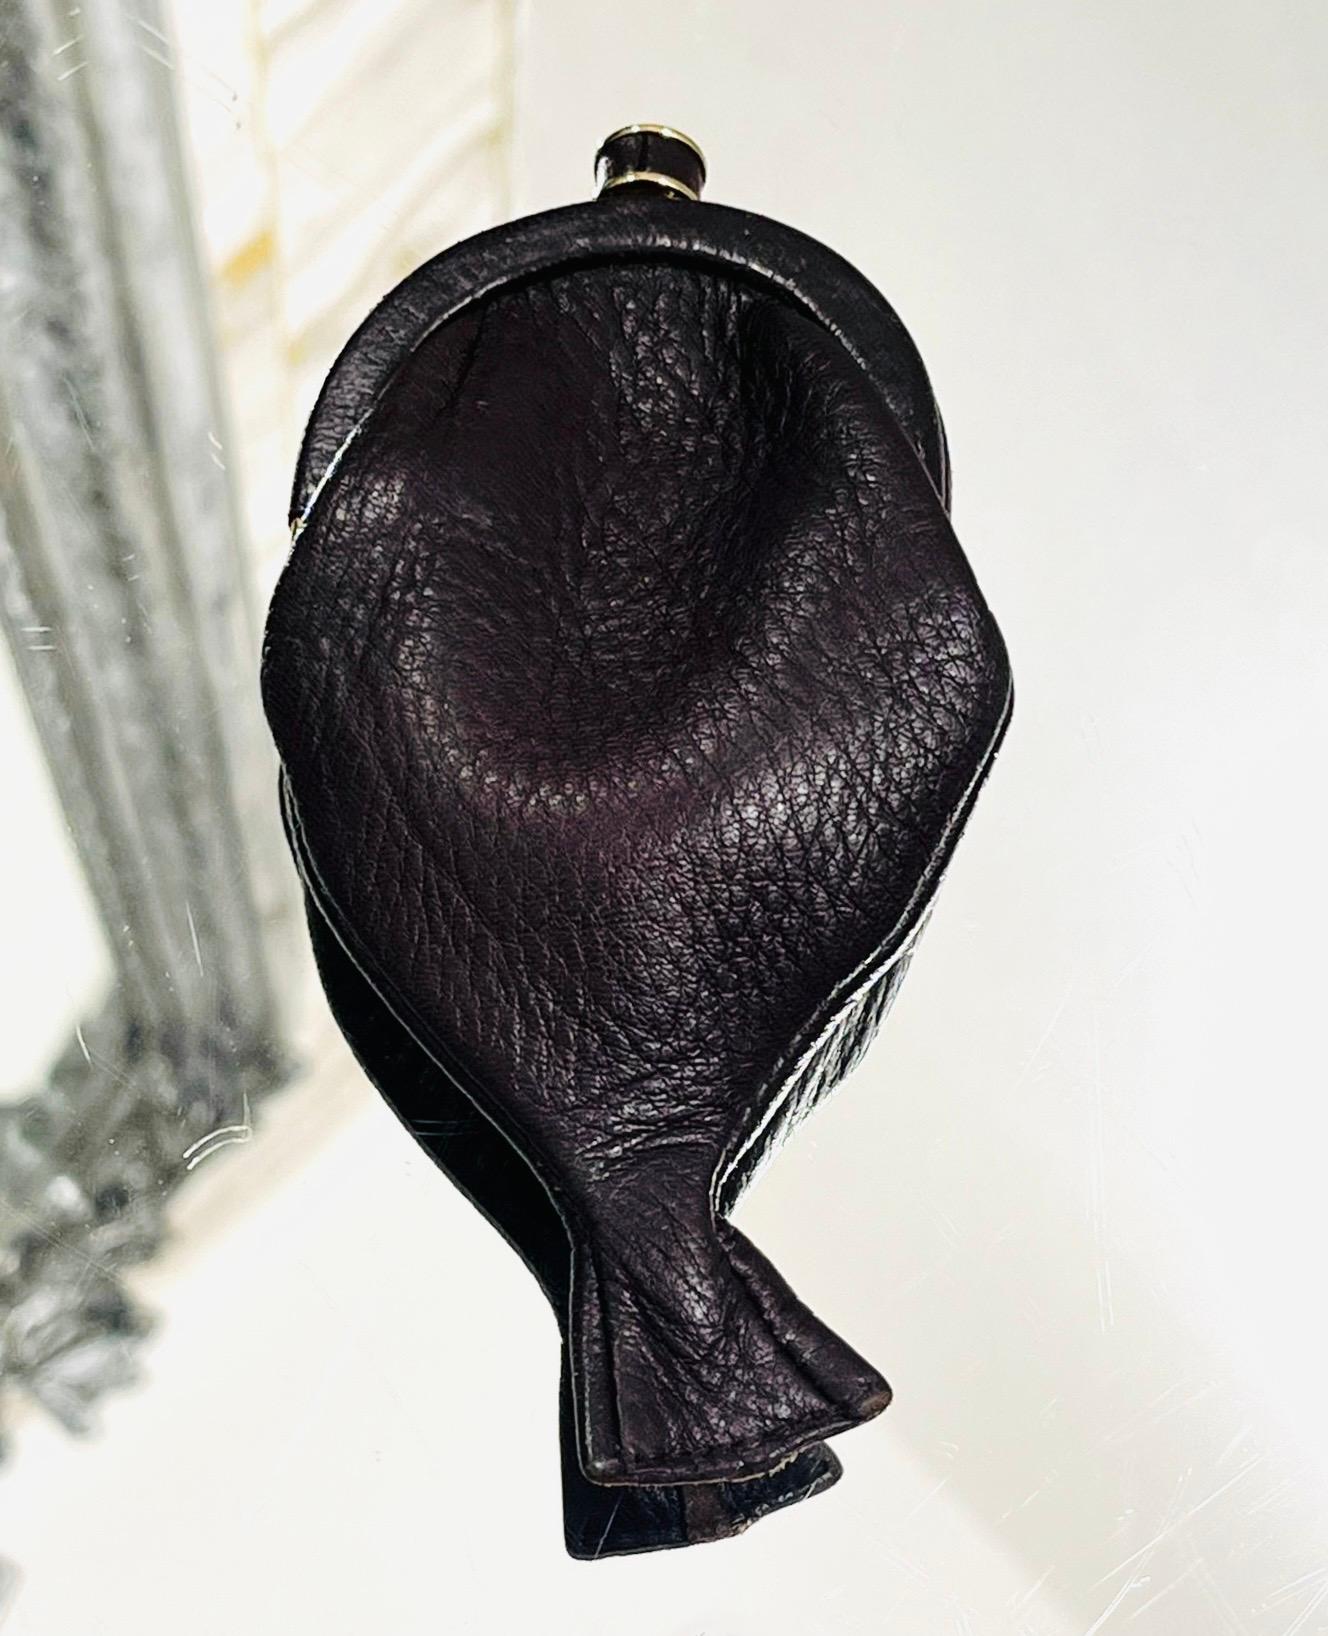 Rare Piece - Bottega Veneta Fishtail Leather Coin Purse

Brown coin purse designed in the shape of a fishtail.

Detailed with gold clasp closure with 'Bottega Veneta' logo engravement and suede interior.

Size –  Height 4cm, Width 9cm, Depth